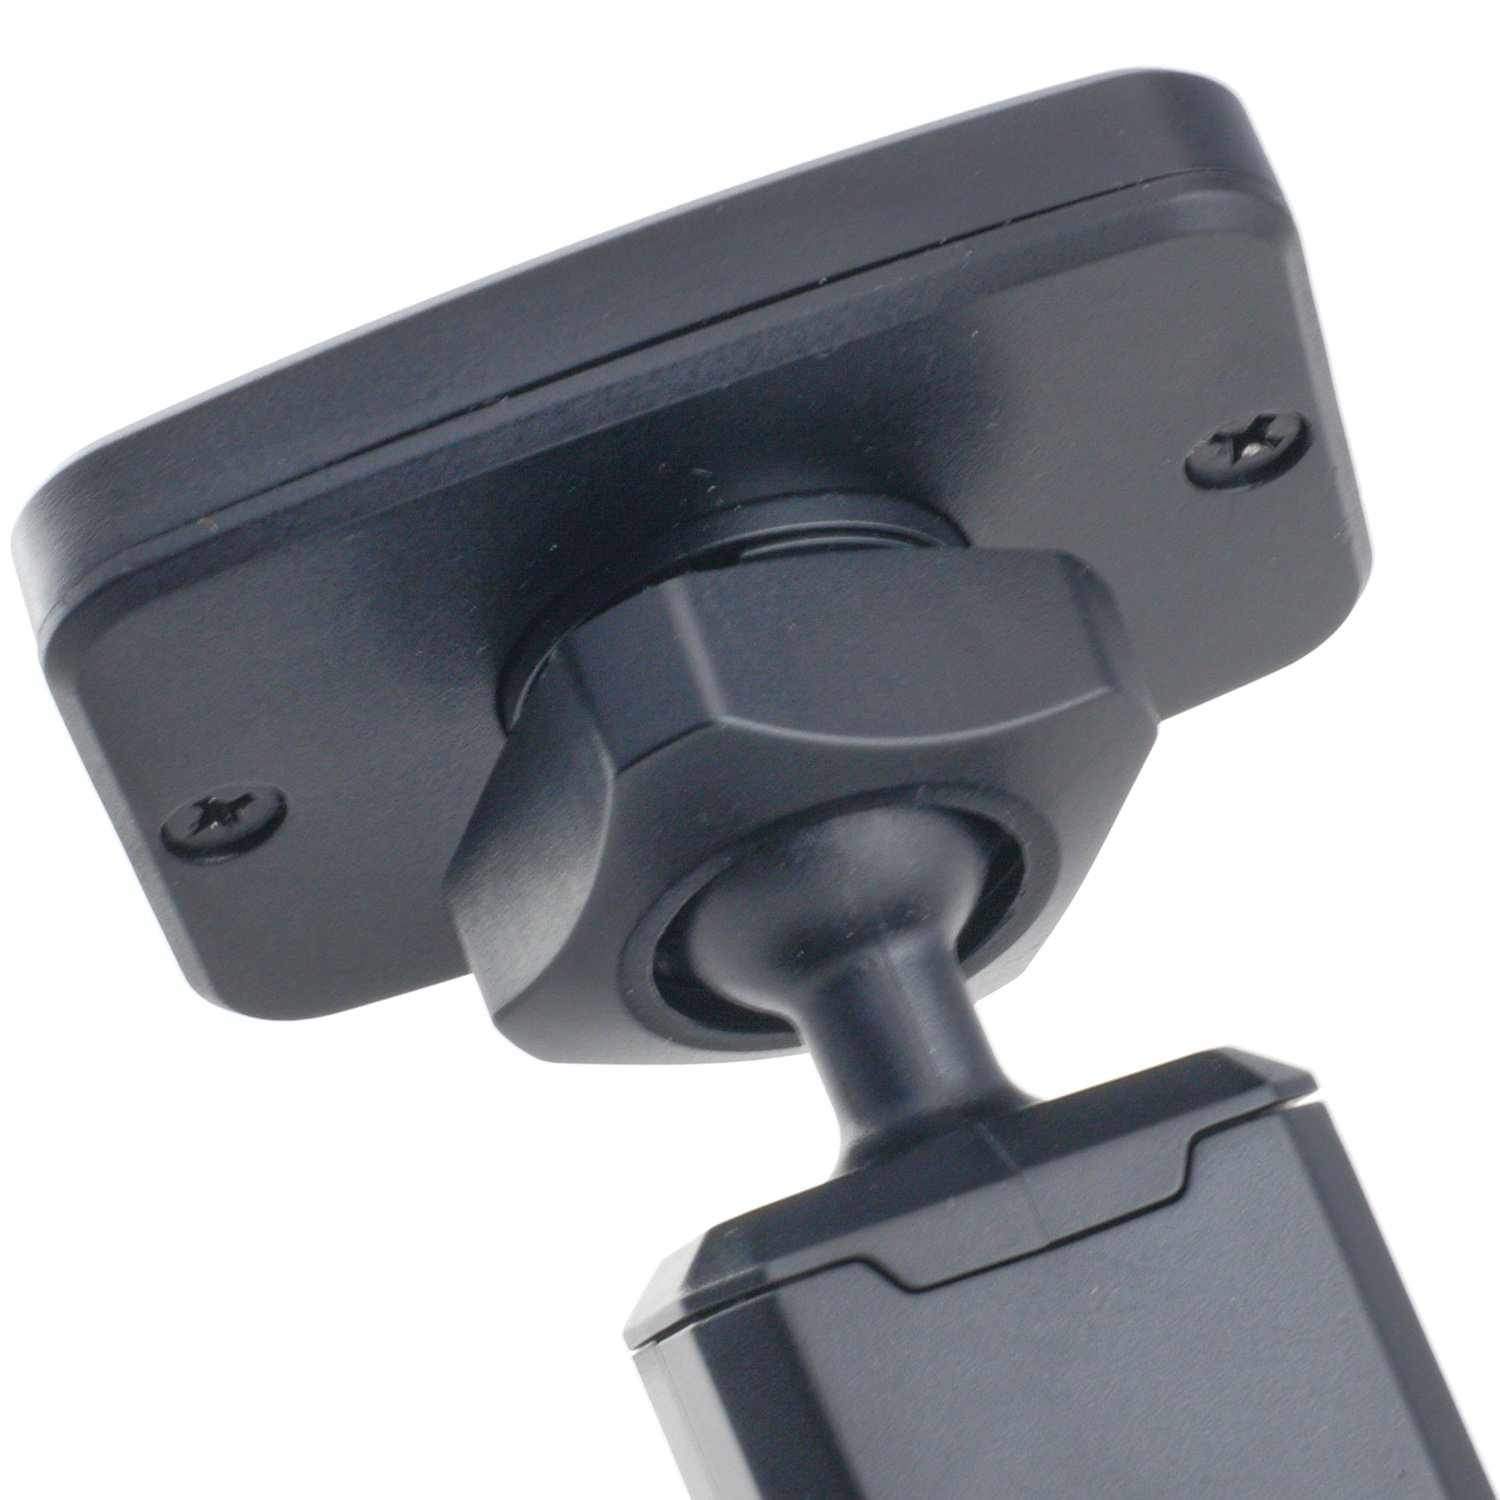  Magnetic Car Suction Cup Holder, Portable Magnetic